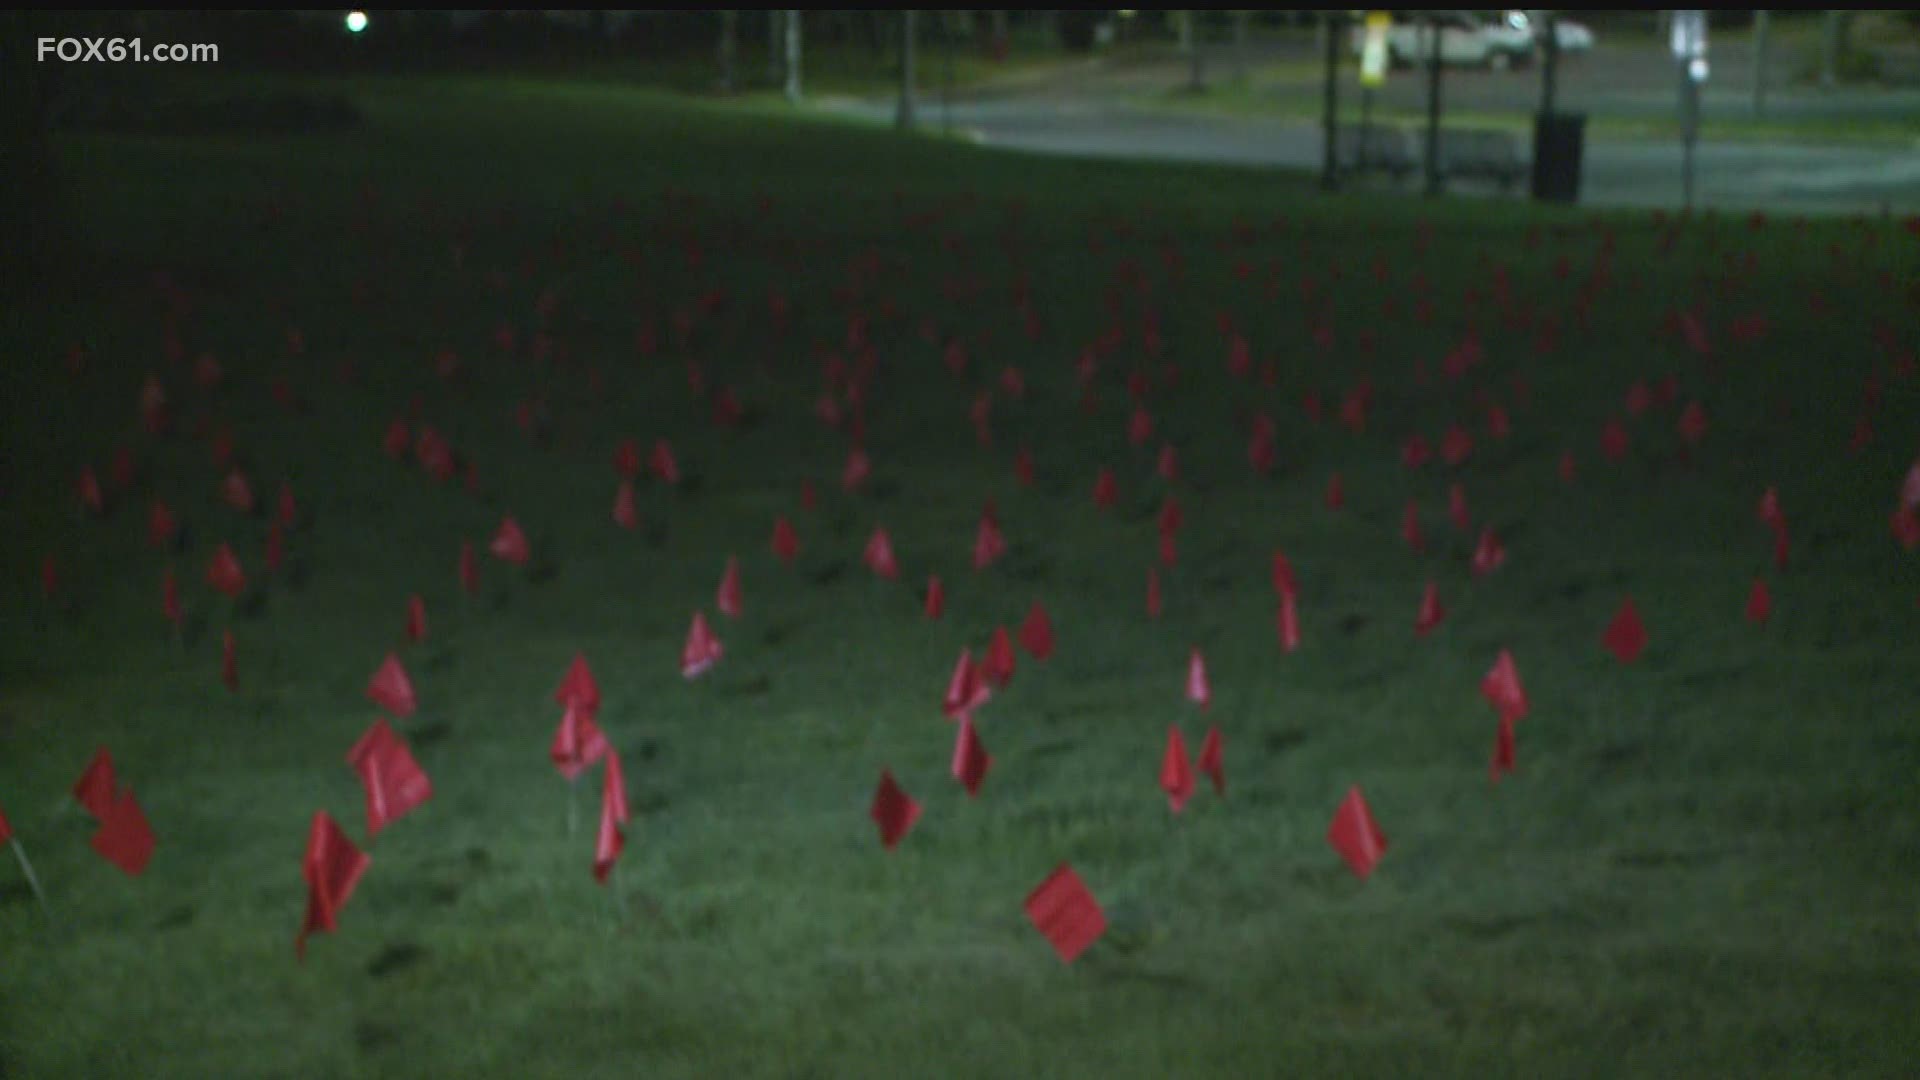 Student-athletes placed more than 1,300 flags on the green as they rallied to try to keep the athletic program as Division I.